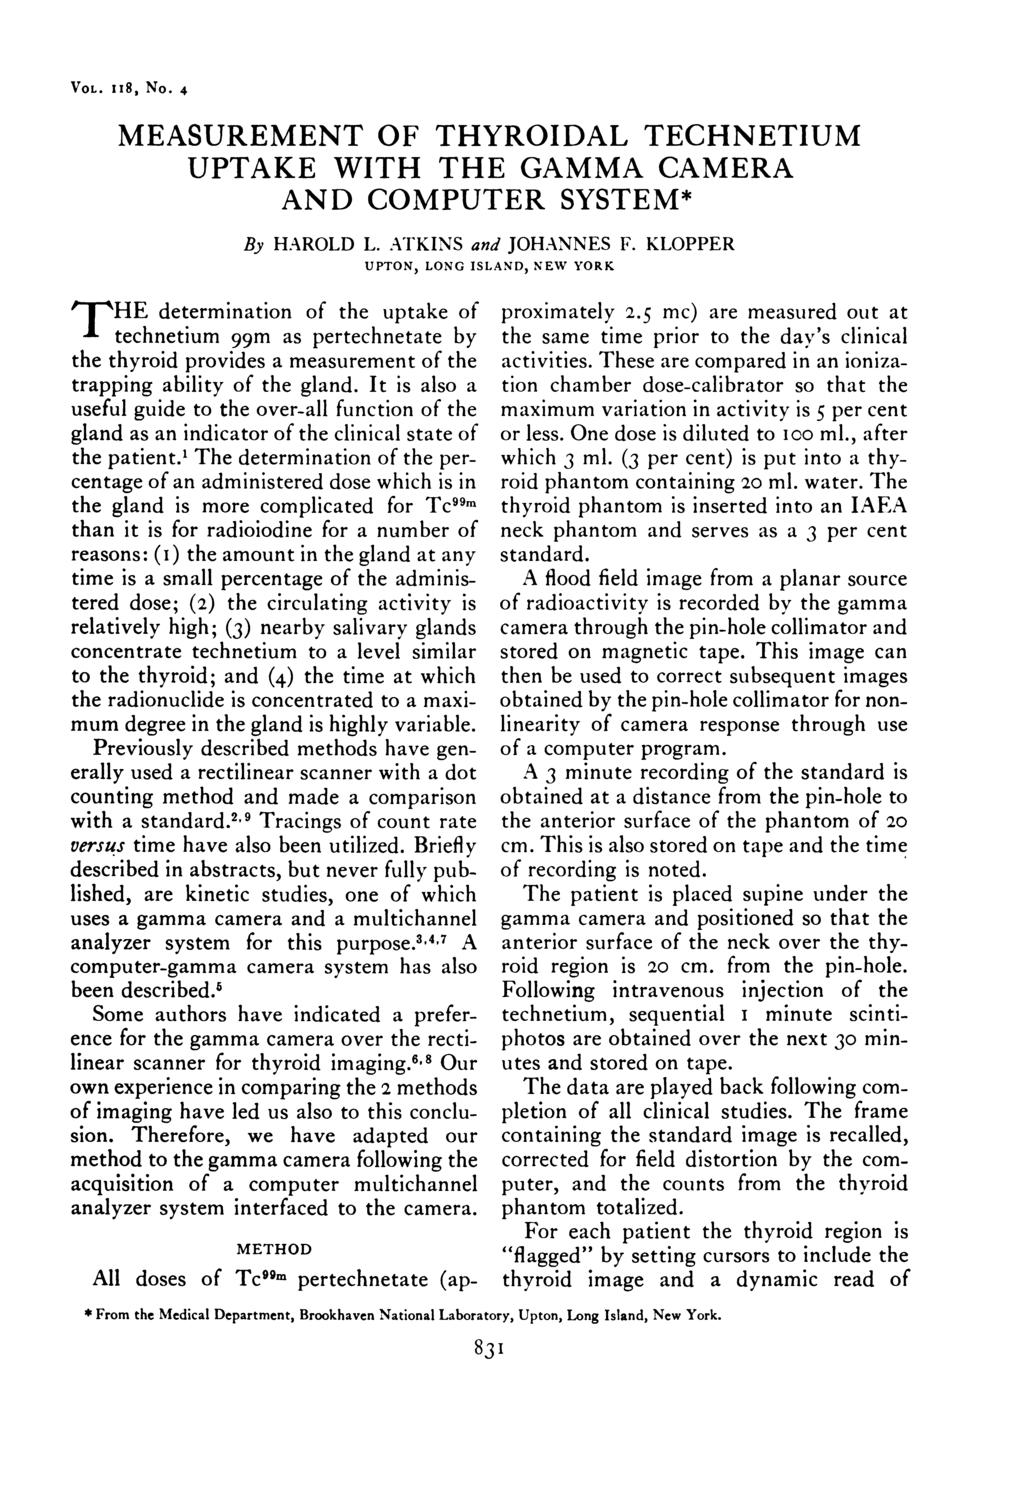 VOL. ii8, No. MEAUREMENT OF THYRODAL TECHNETUM UPTAKE WTH THE GAMMA CAMERA AND COMPUTER YTEM* Downloaded from www.ajronline.org by 46.3.26.89 on 3/8/18 from P address 46.3.26.89. Copyright ARR.